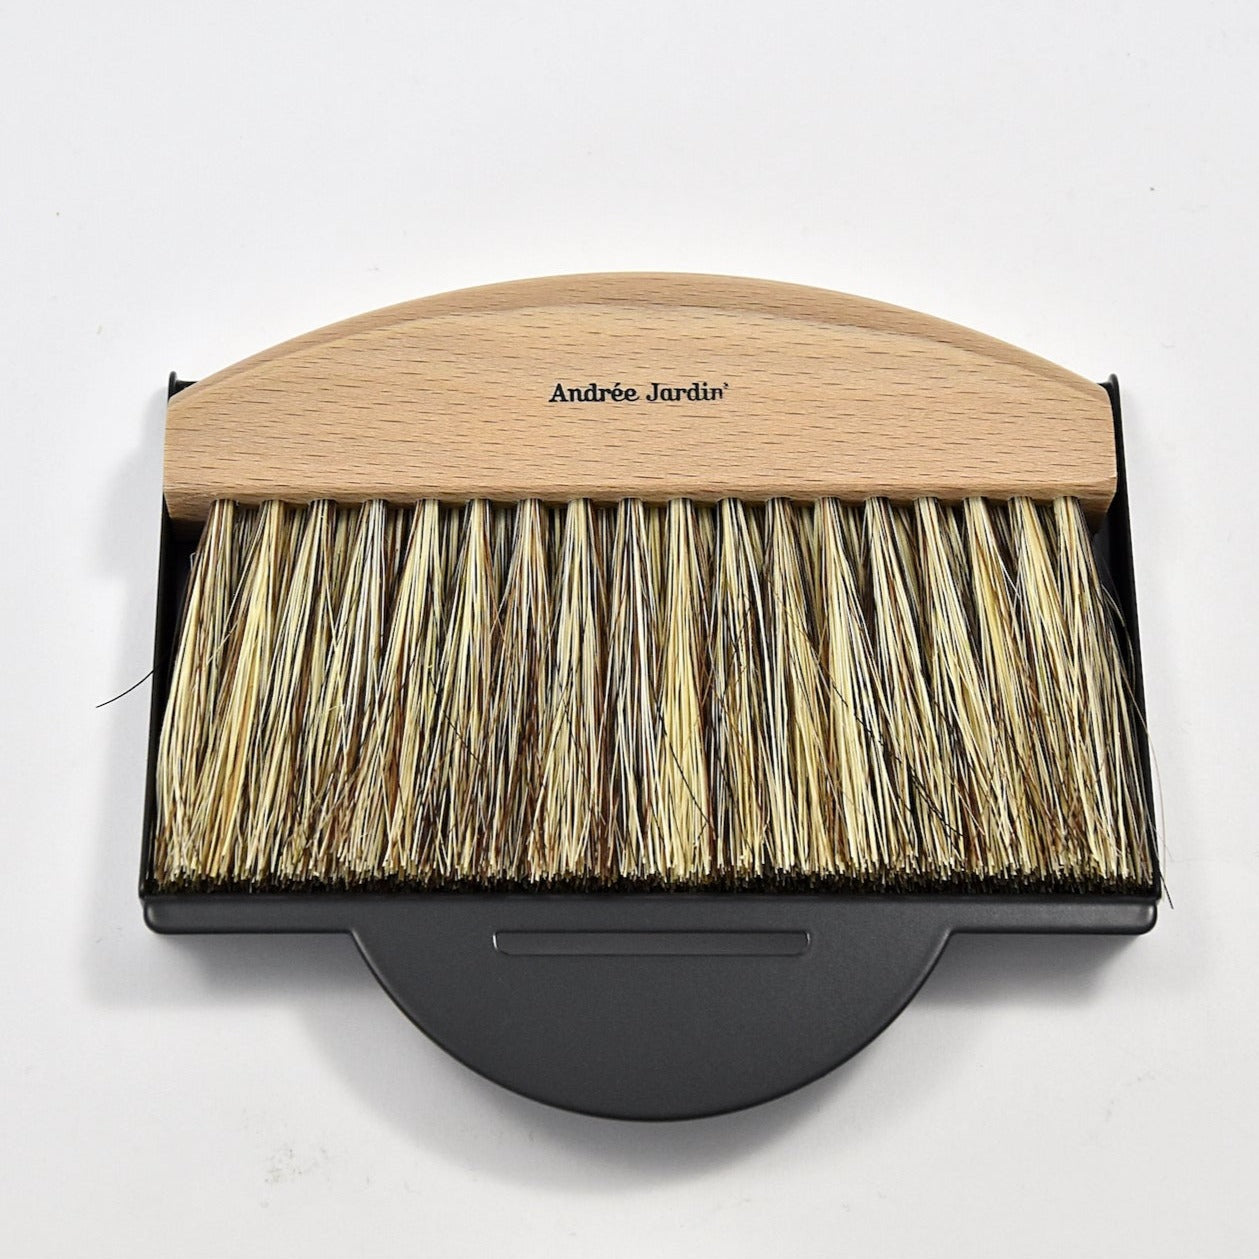 Andrée Jardin Mr. and Mrs. Clynk Natural Table Brush and Dustpan Set Black Utilities Andrée Jardin Back in stock Brand_Andrée Jardin Home_Broom Sets Home_Household Cleaning New Arrivals coffret-epoussette-ramasse-miettes-clynk-nature-3165_aa5ccc76-af9e-470e-87ab-37c46033e111